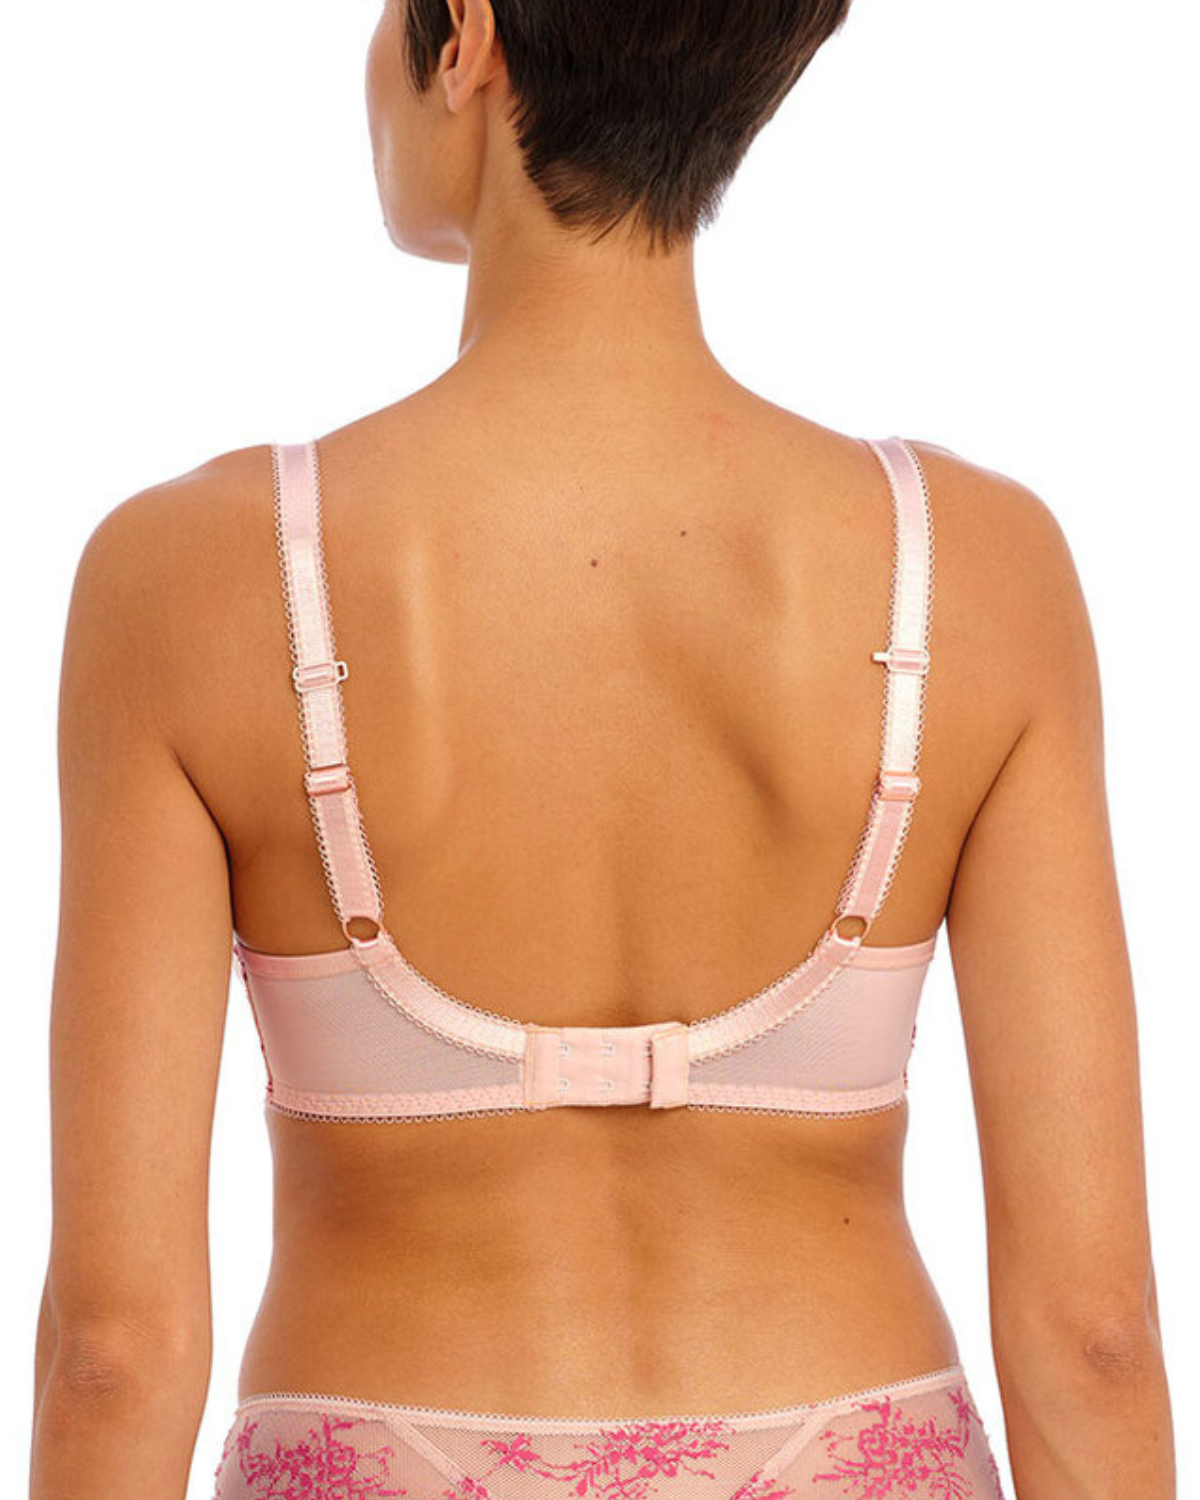 Model wearing a molded spacer underwire bra in pink with lace wings